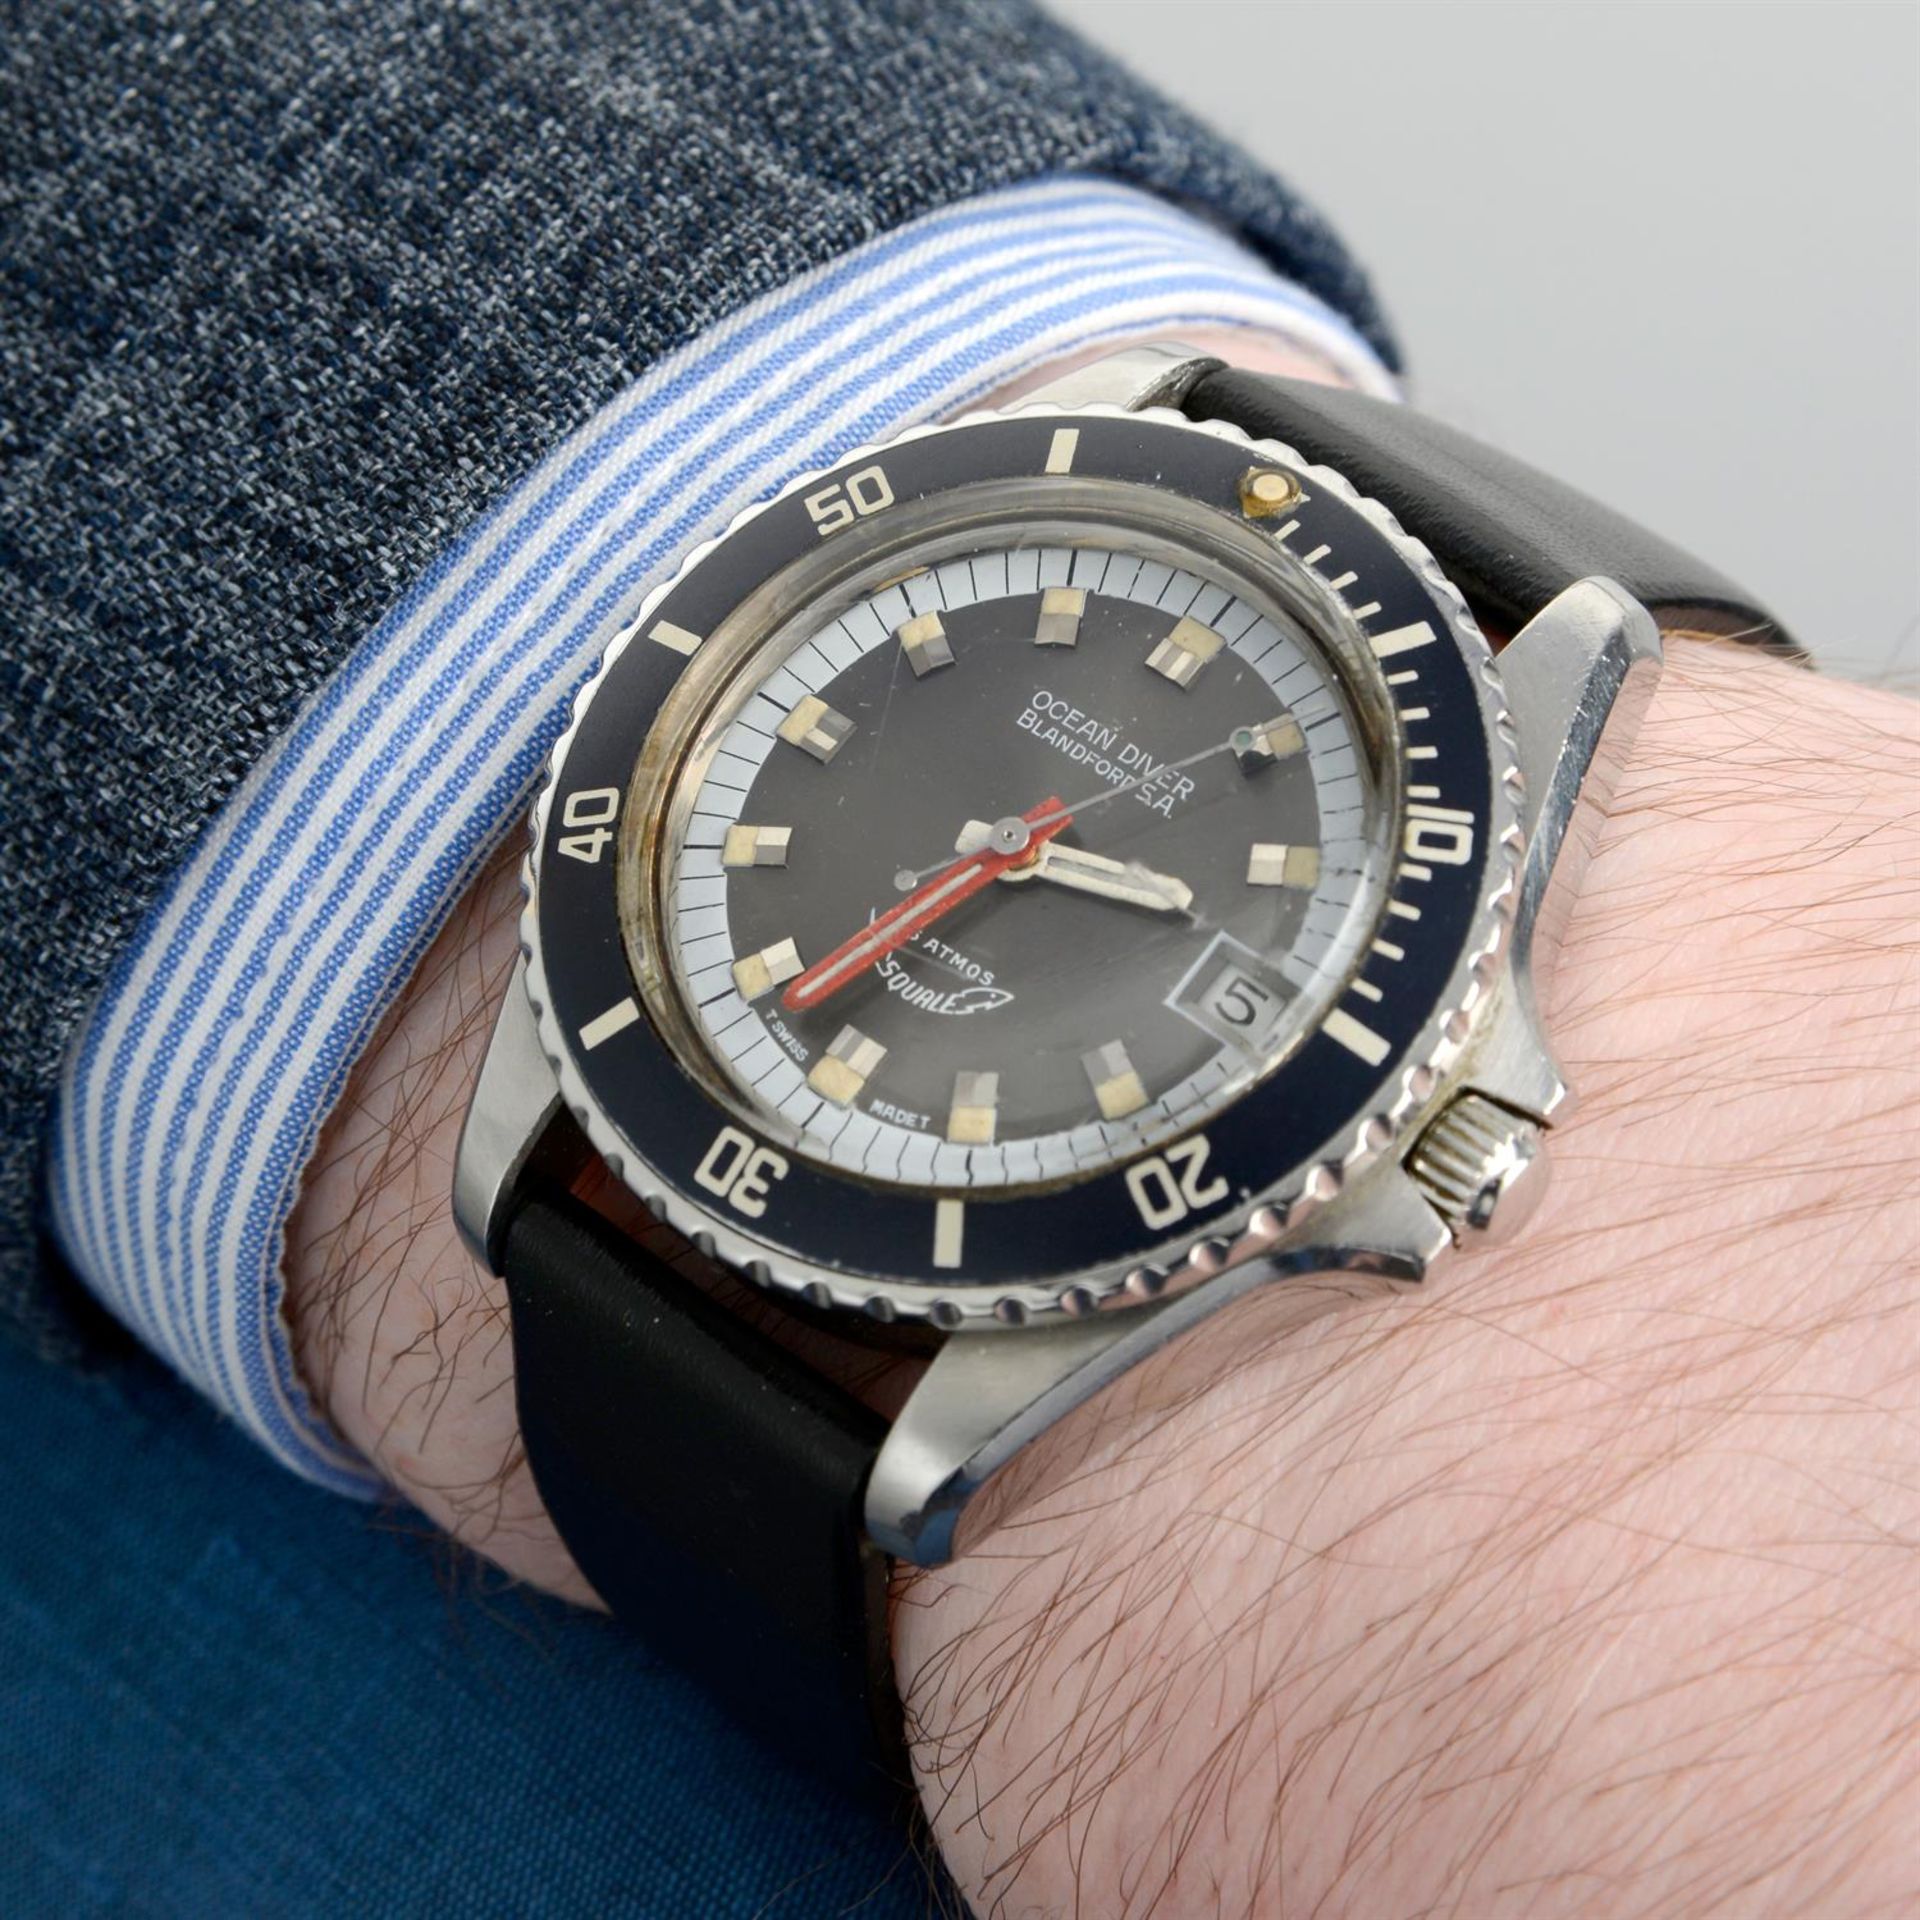 Squale - an Ocean Diver watch, 37mm. - Image 5 of 5